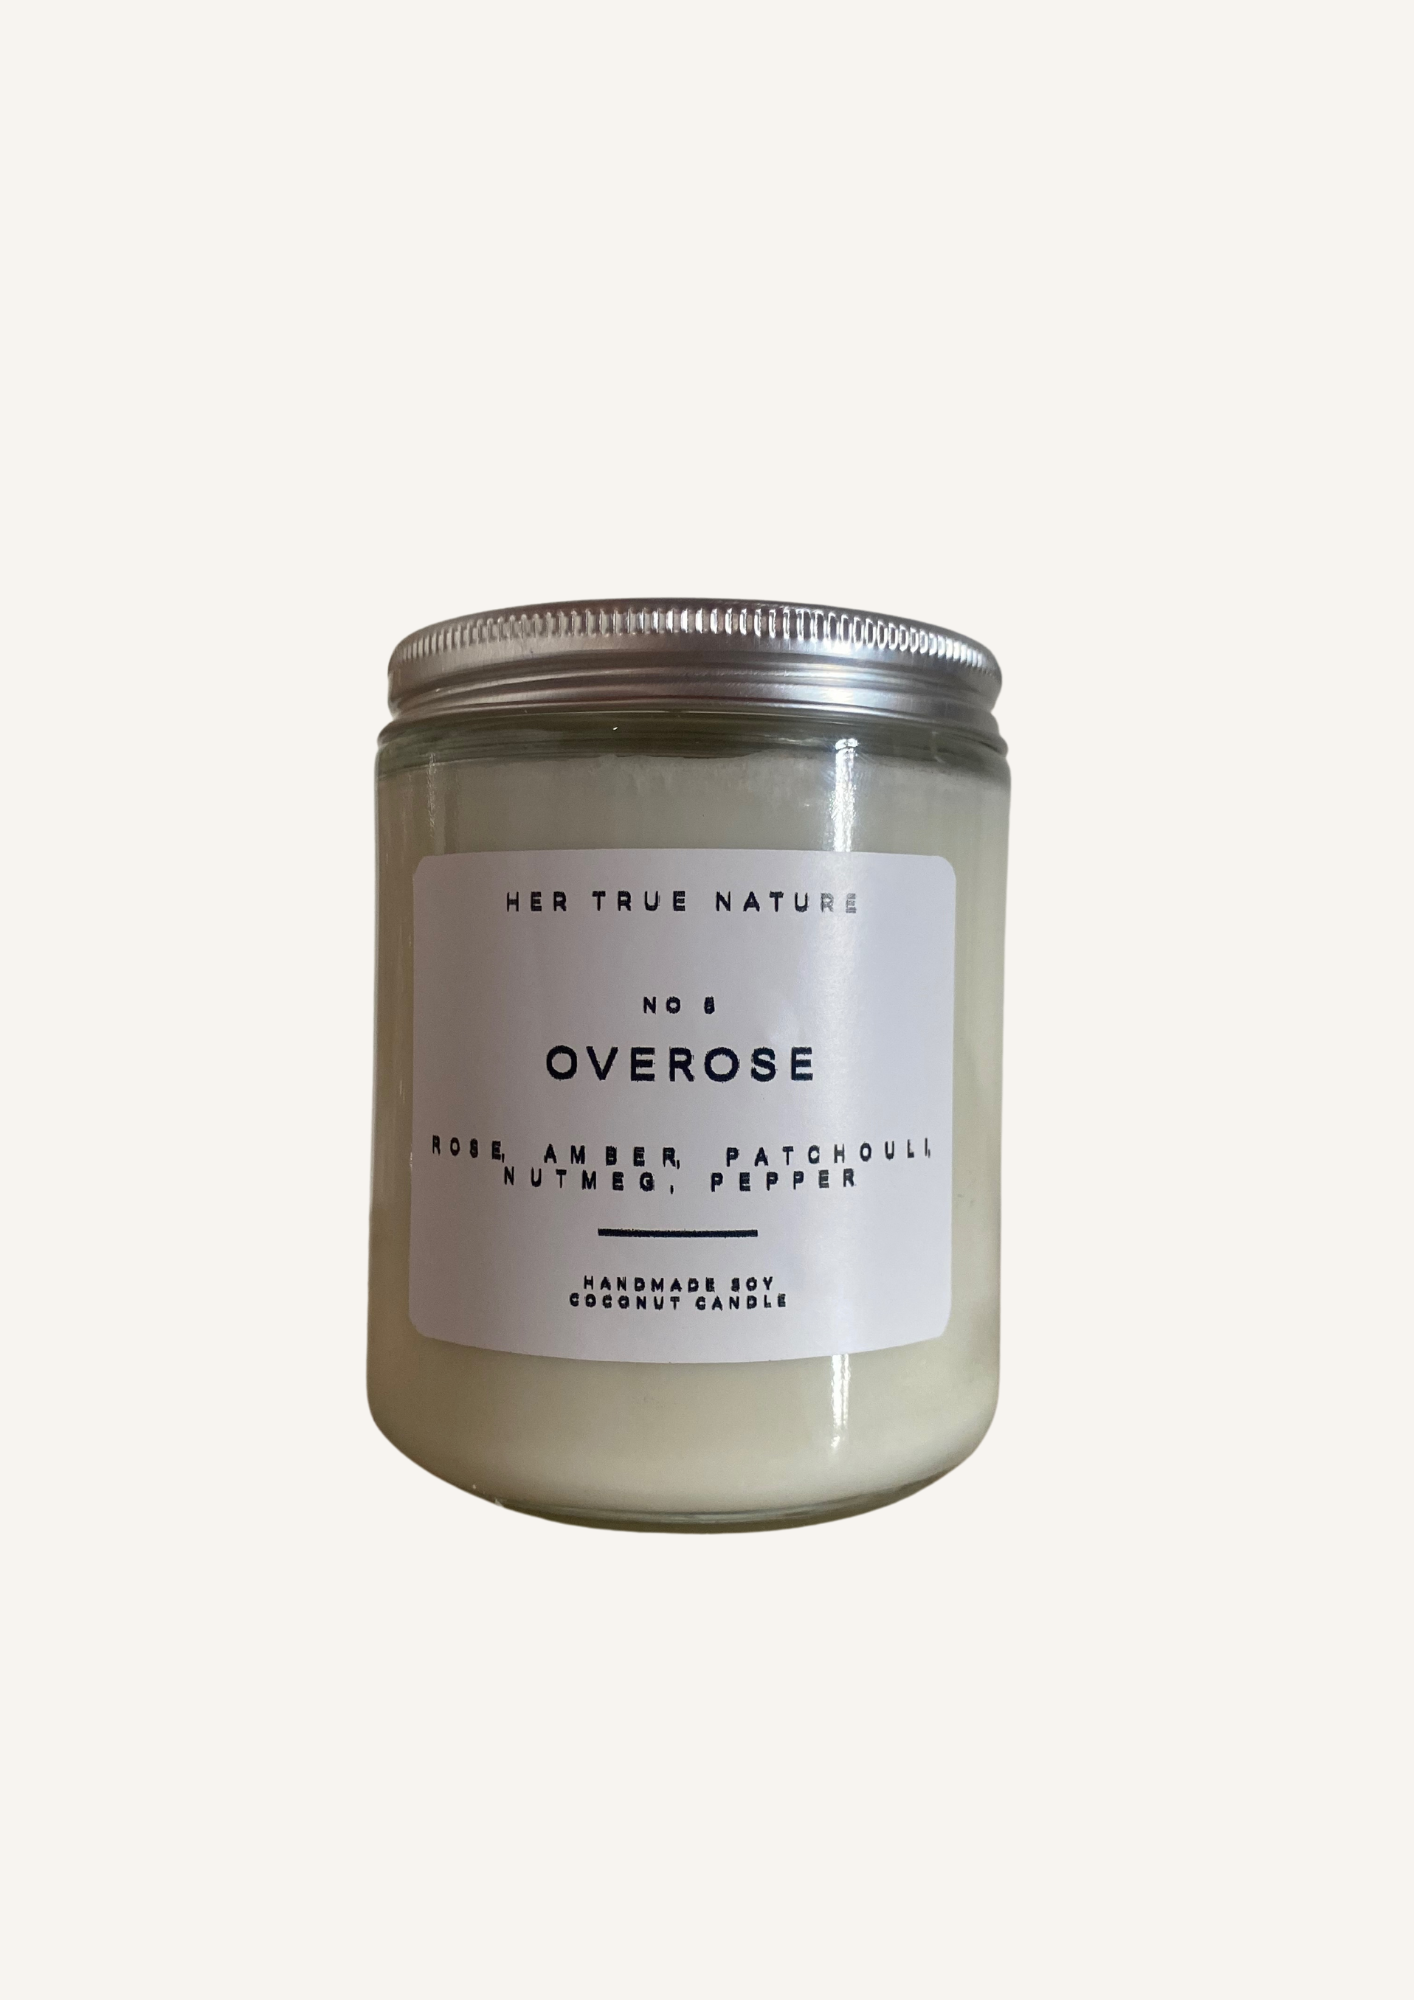 Overose candle in clear jar